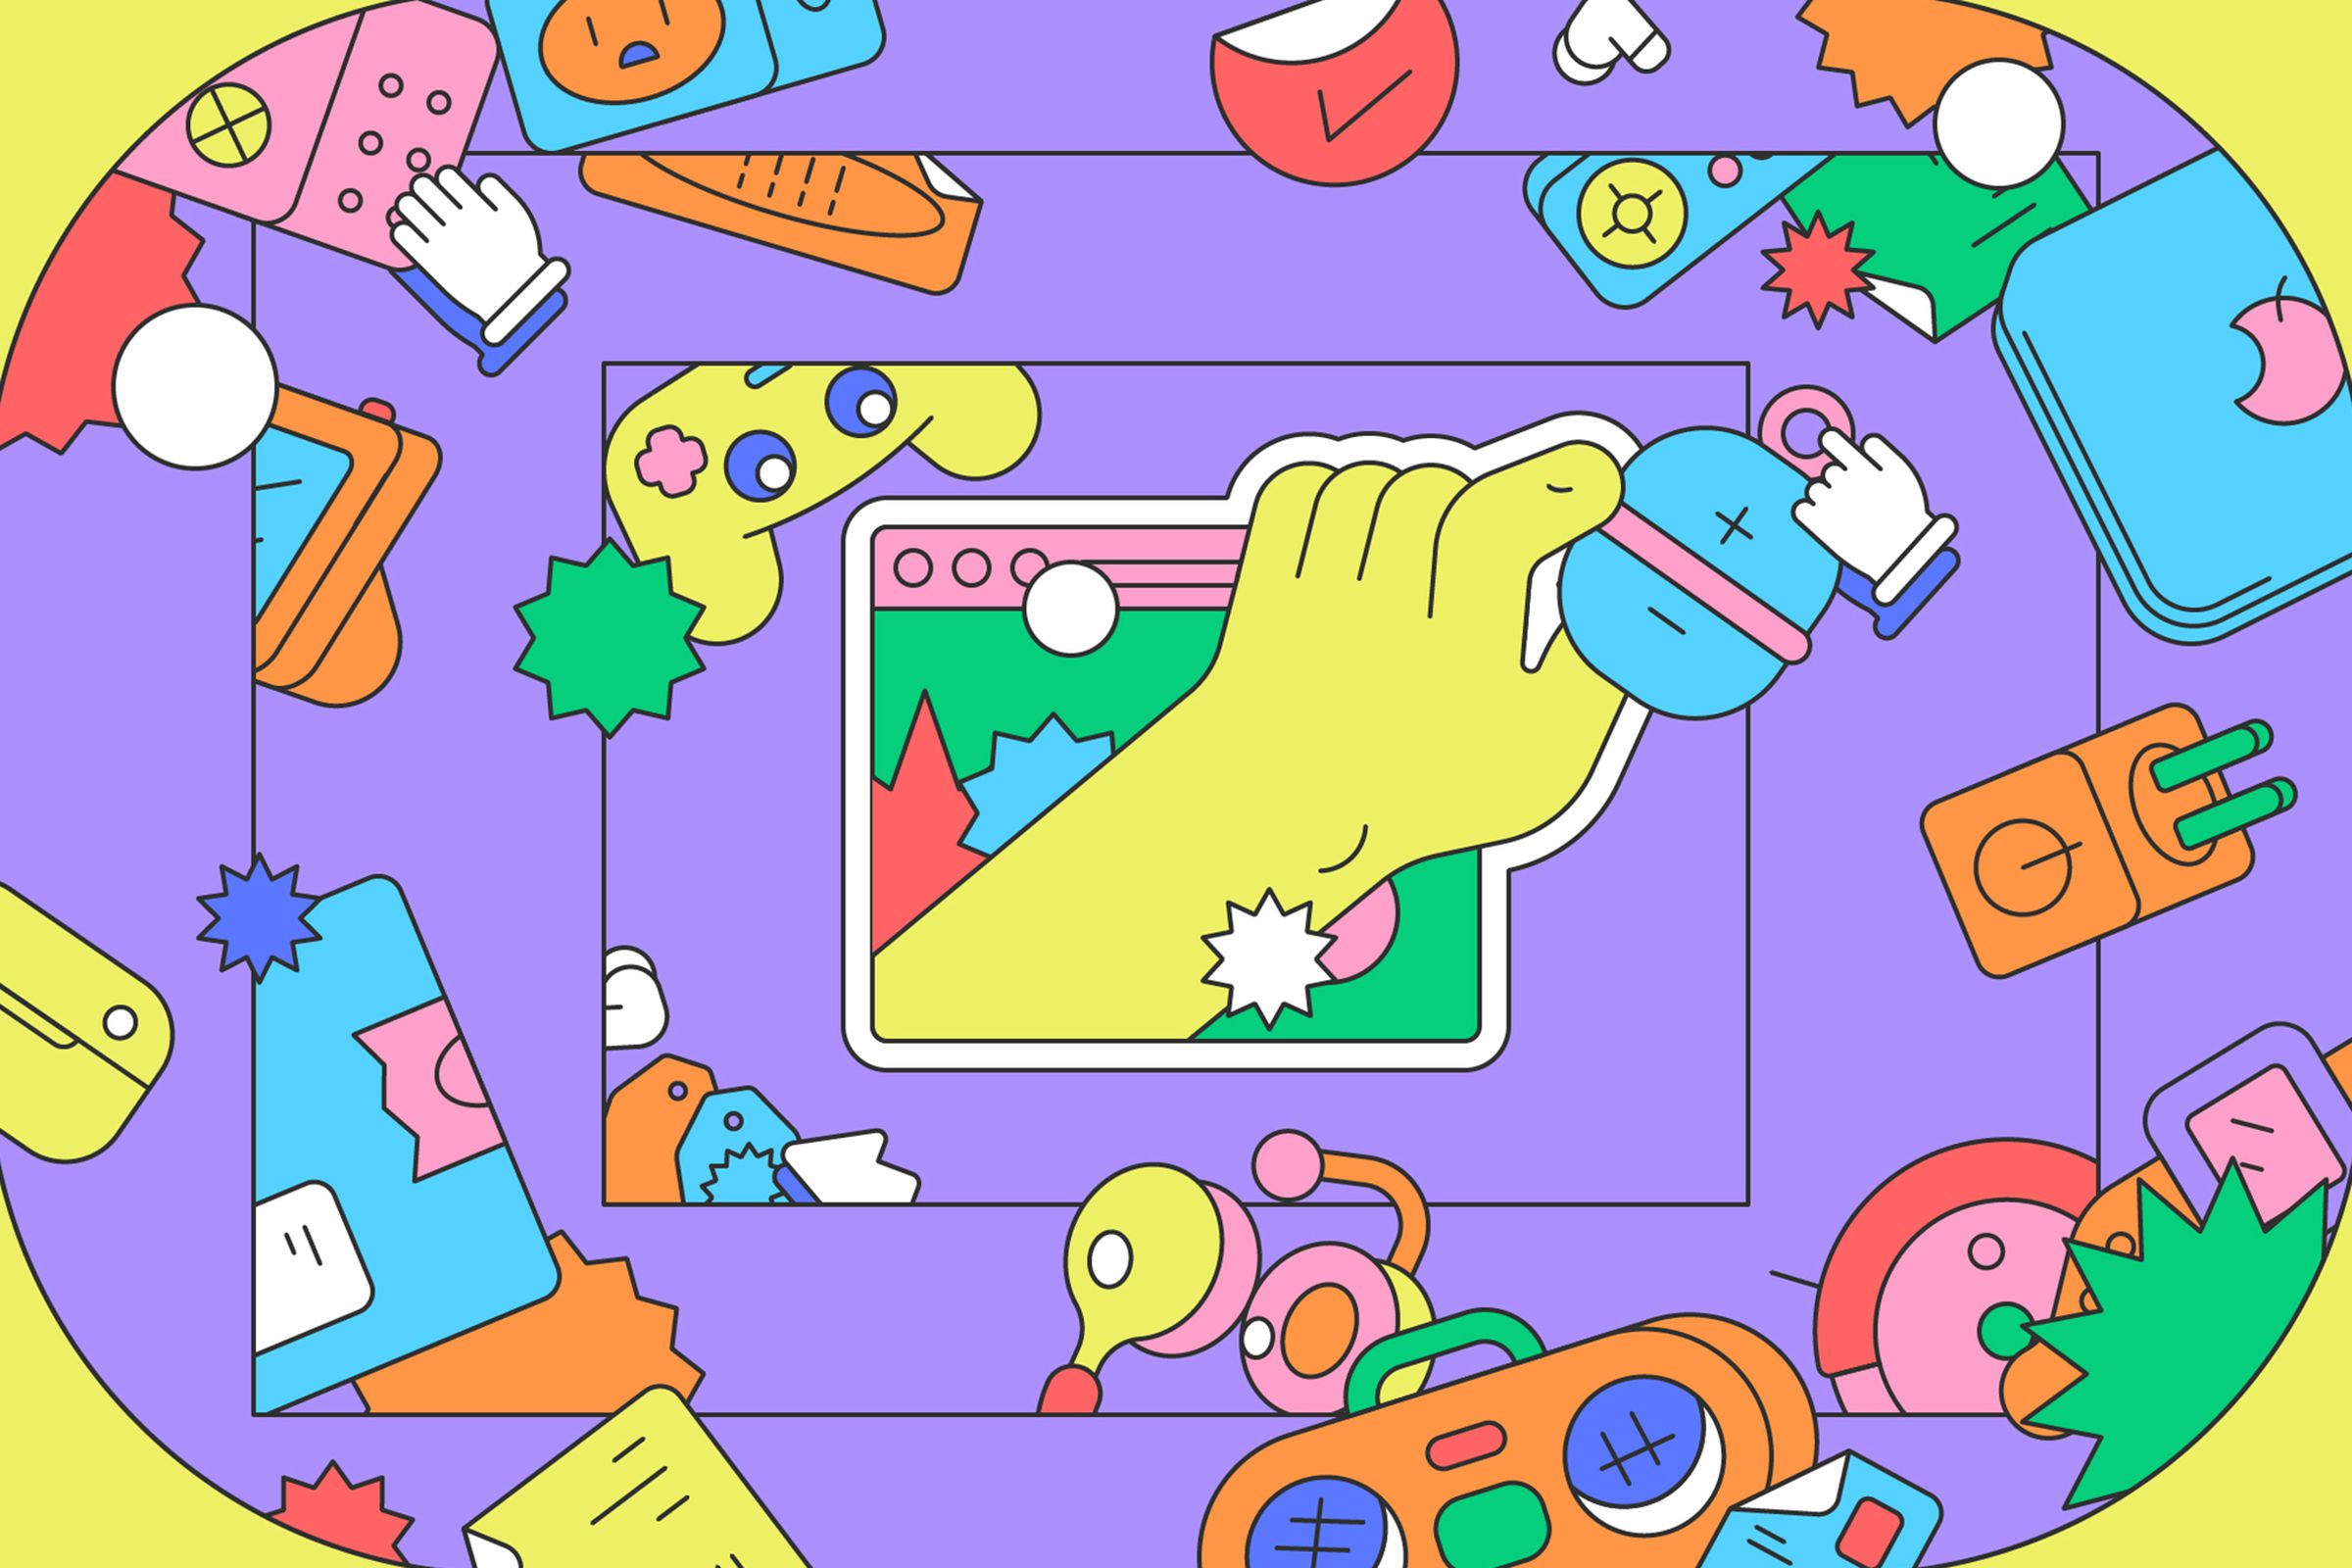 Brightly colored vector illustration of a hand grabbing a device from inside a browser window.